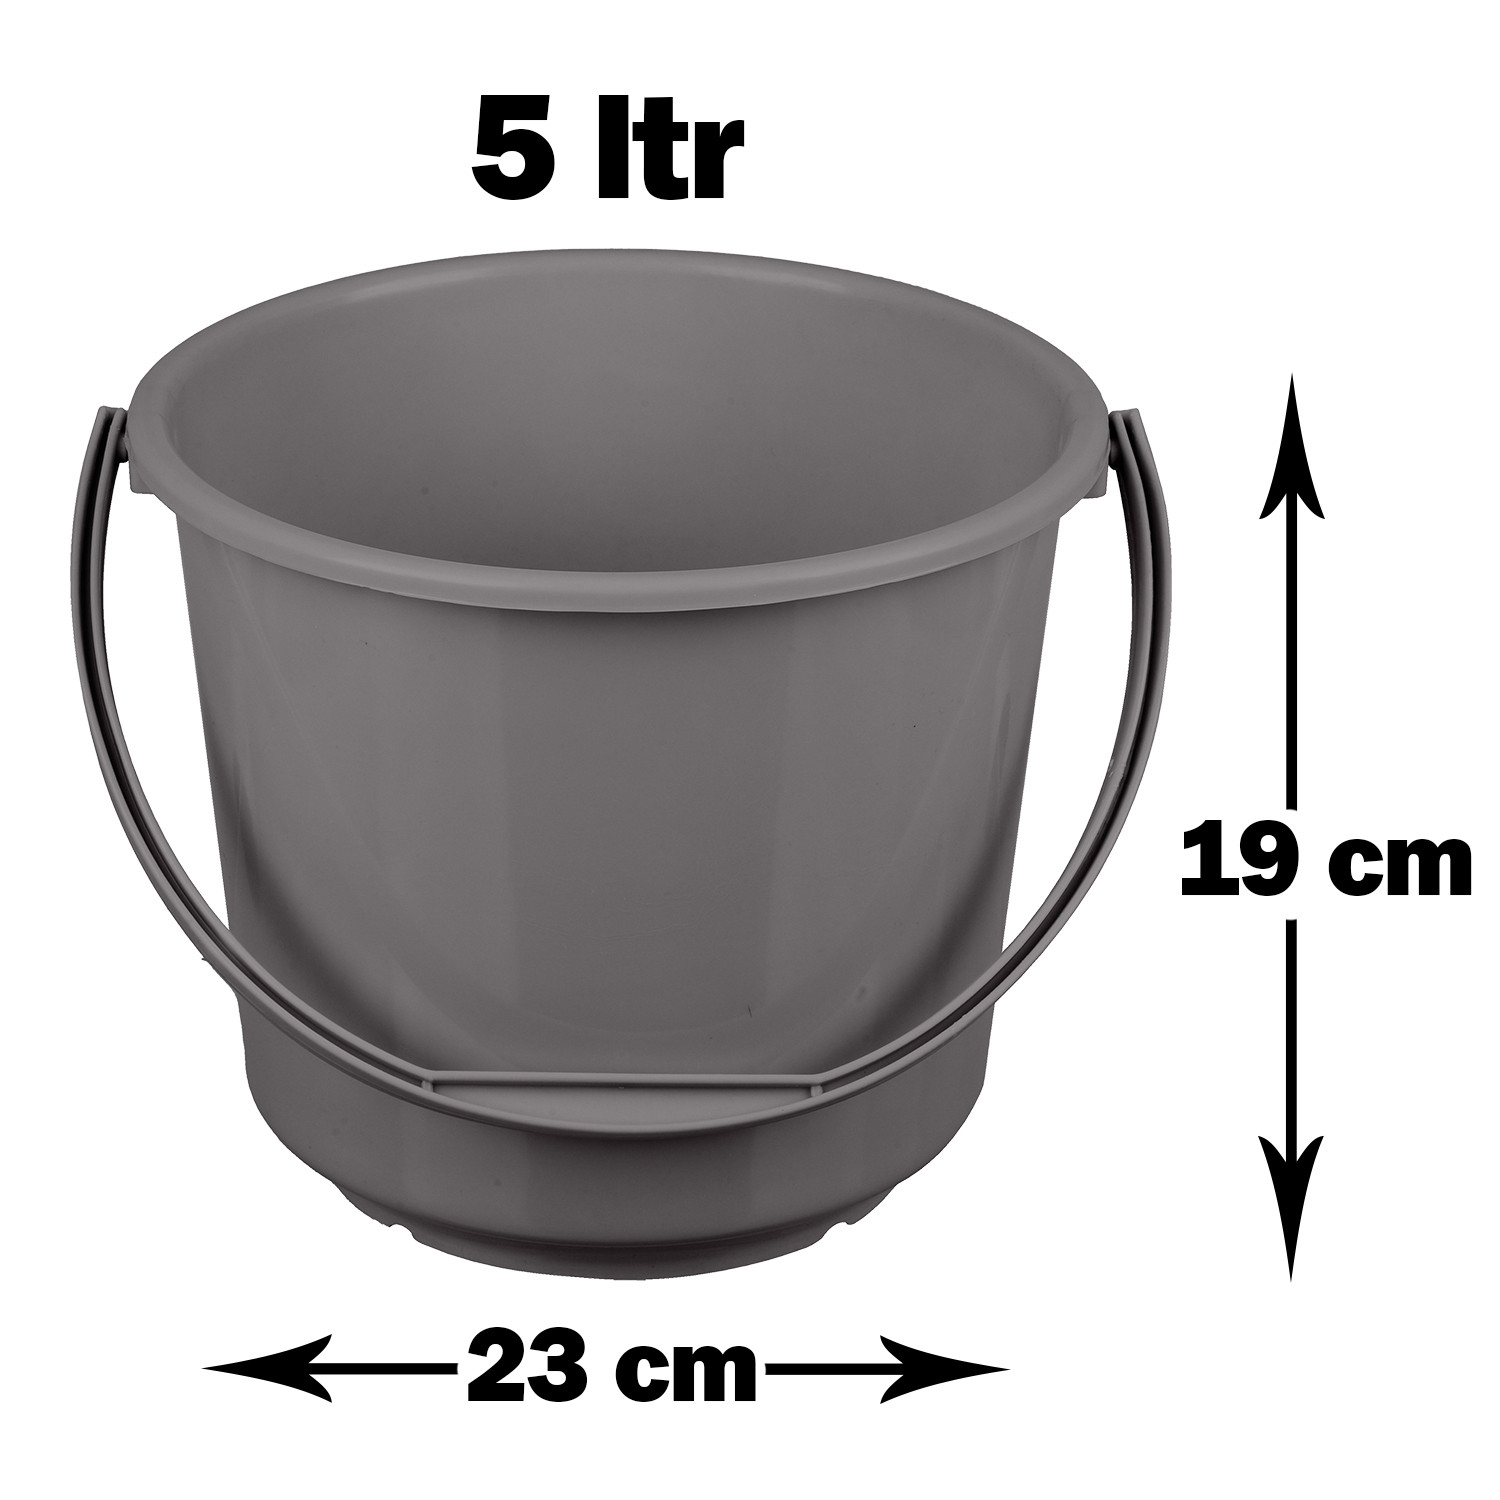 Kuber Industries Bucket | Plastic Bucket for Mopping | Bucket for Cleaning | Storage Container Bucket | Water Storage Bucket | Bathroom Bucket | Plain Bucket | 5 LTR | Pack of 2 | Multi